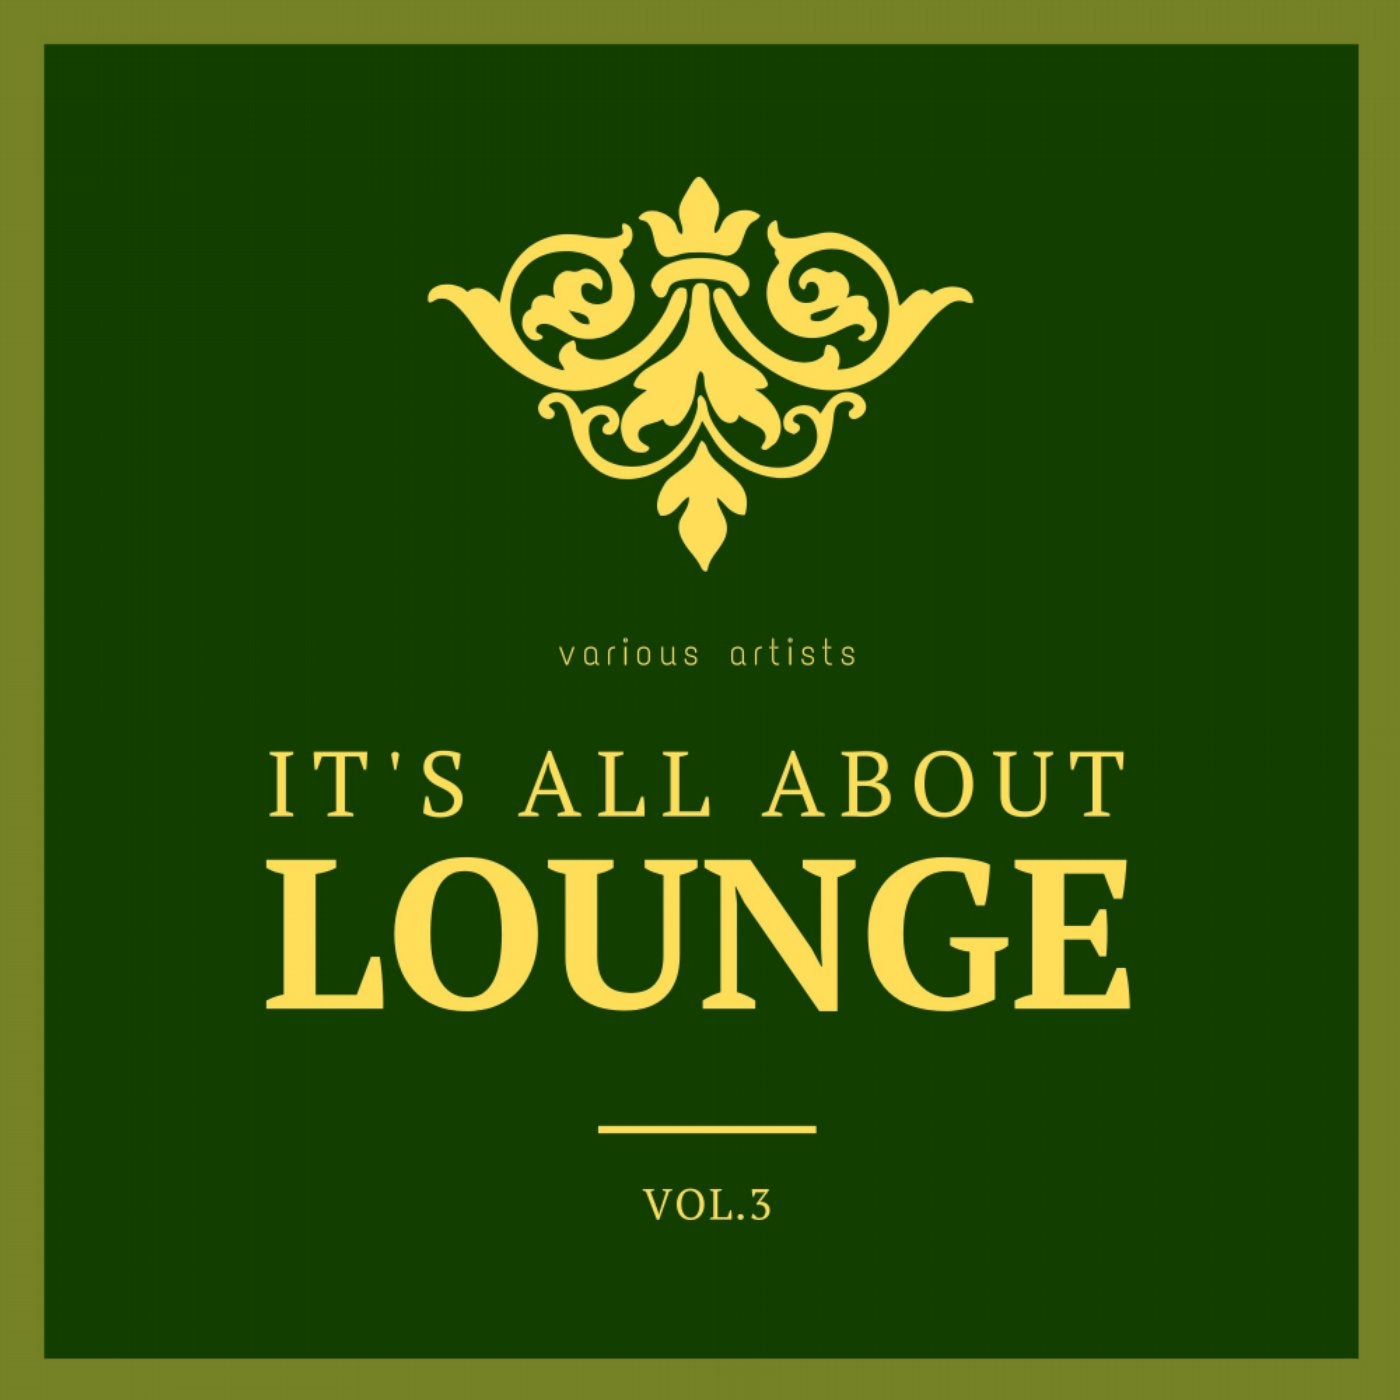 It's All About Lounge, Vol. 3